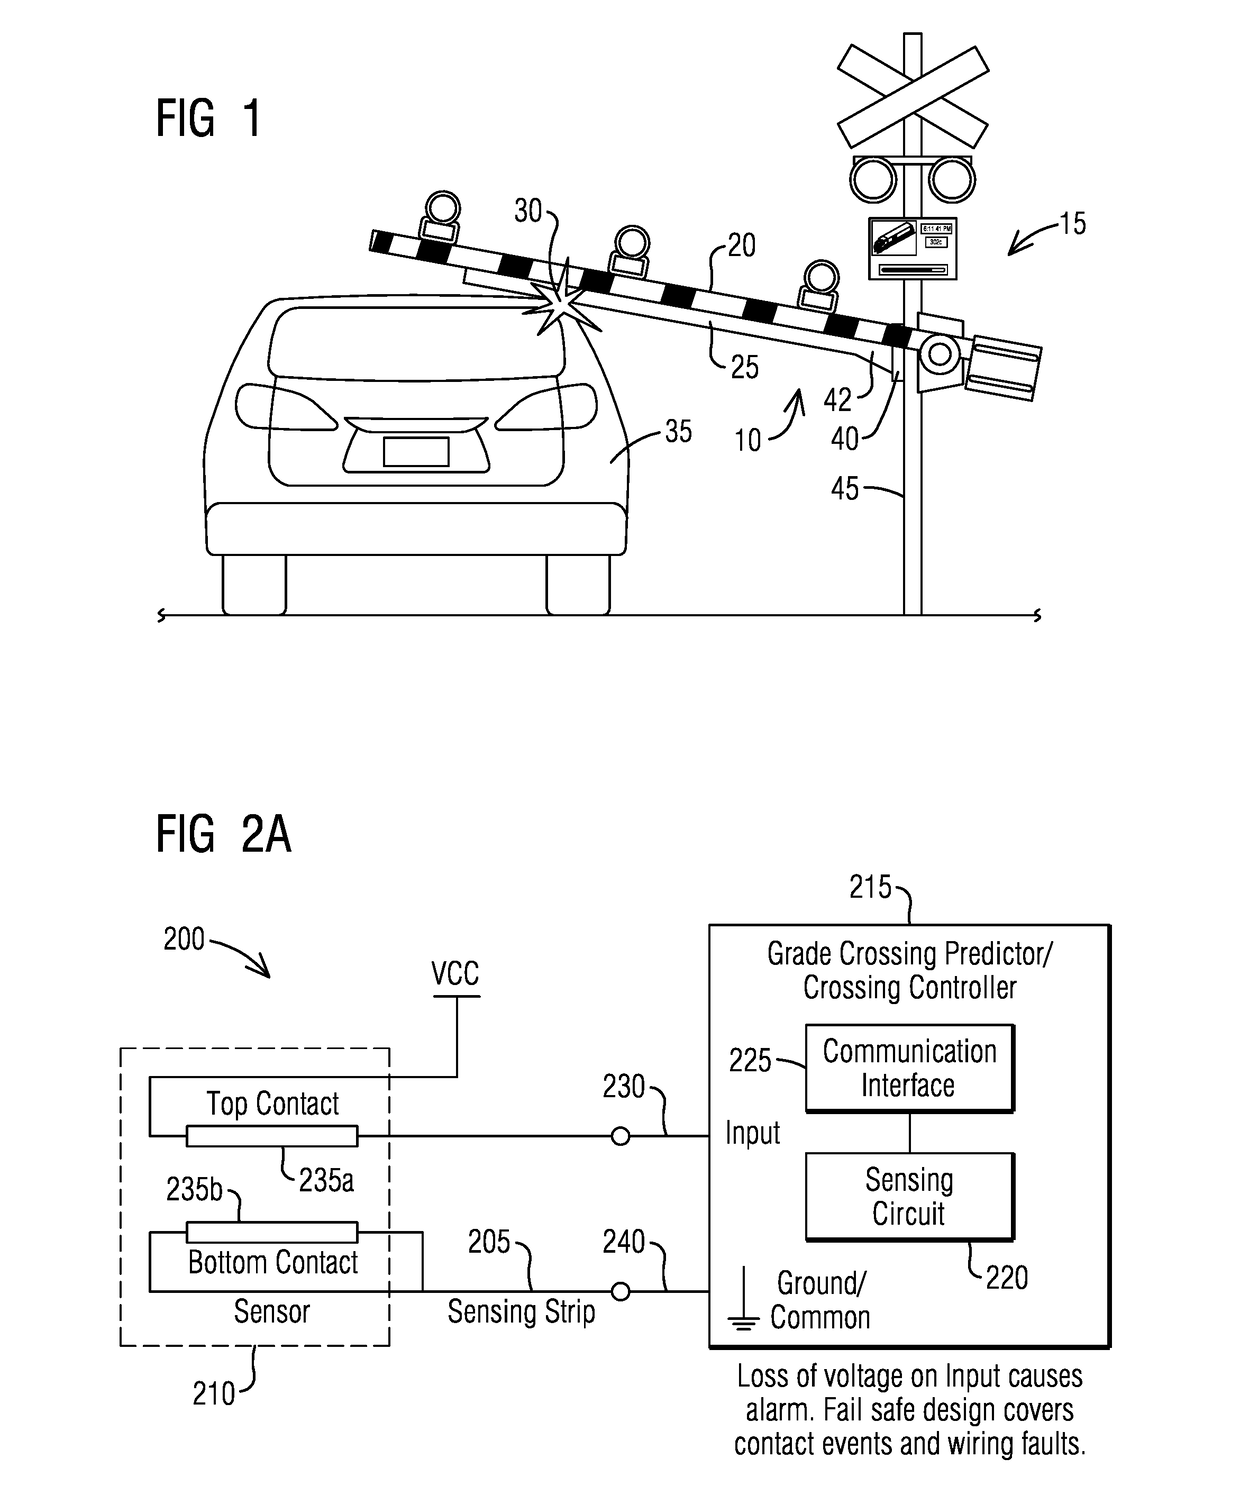 Gate crossing arm collision detection system and method